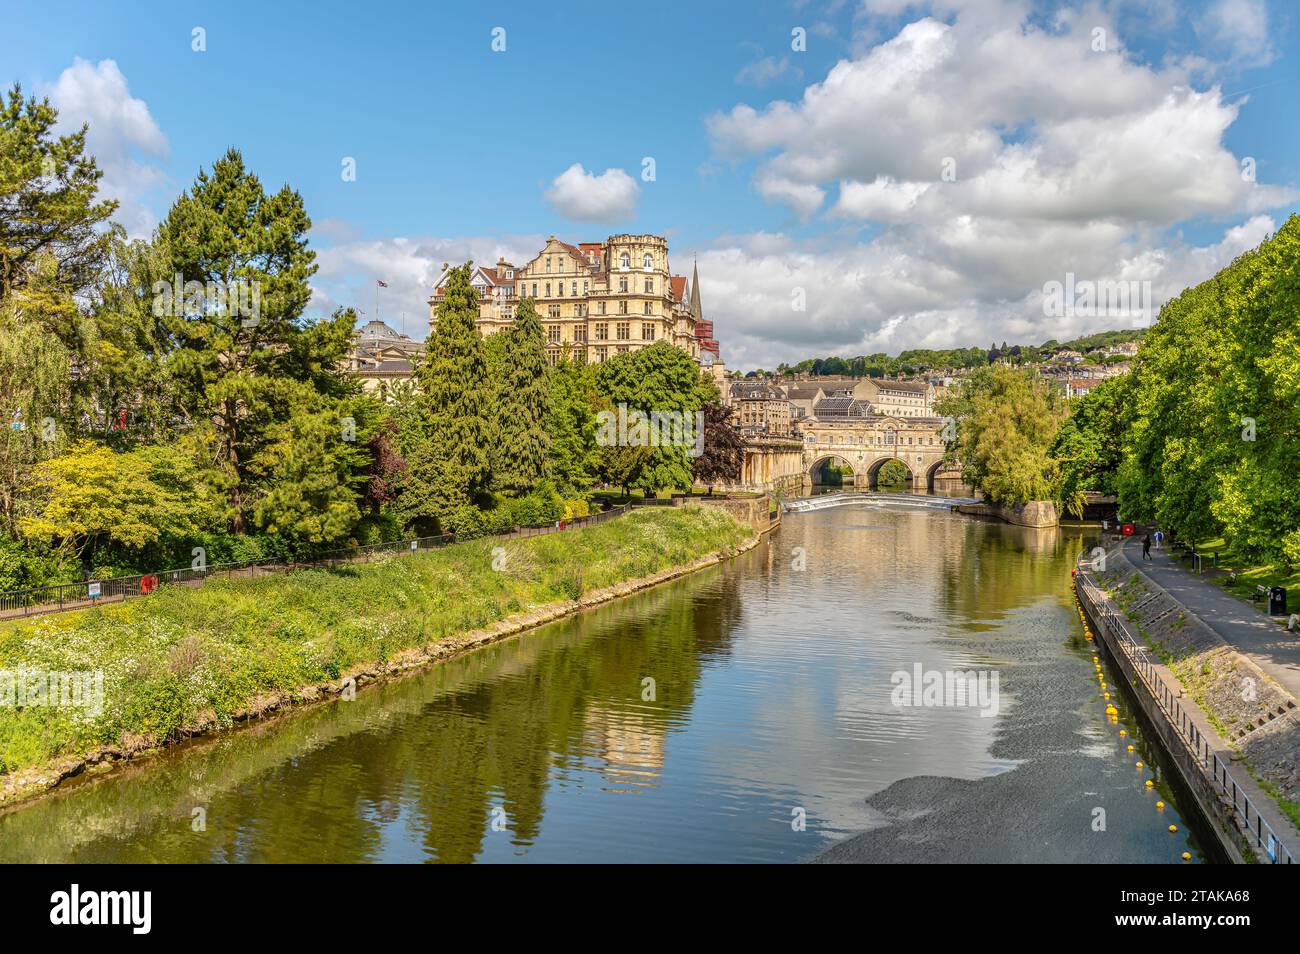 View over the Parade Gardens at the riverbanks of the River Avon, Bath, Somerset, England Stock Photo